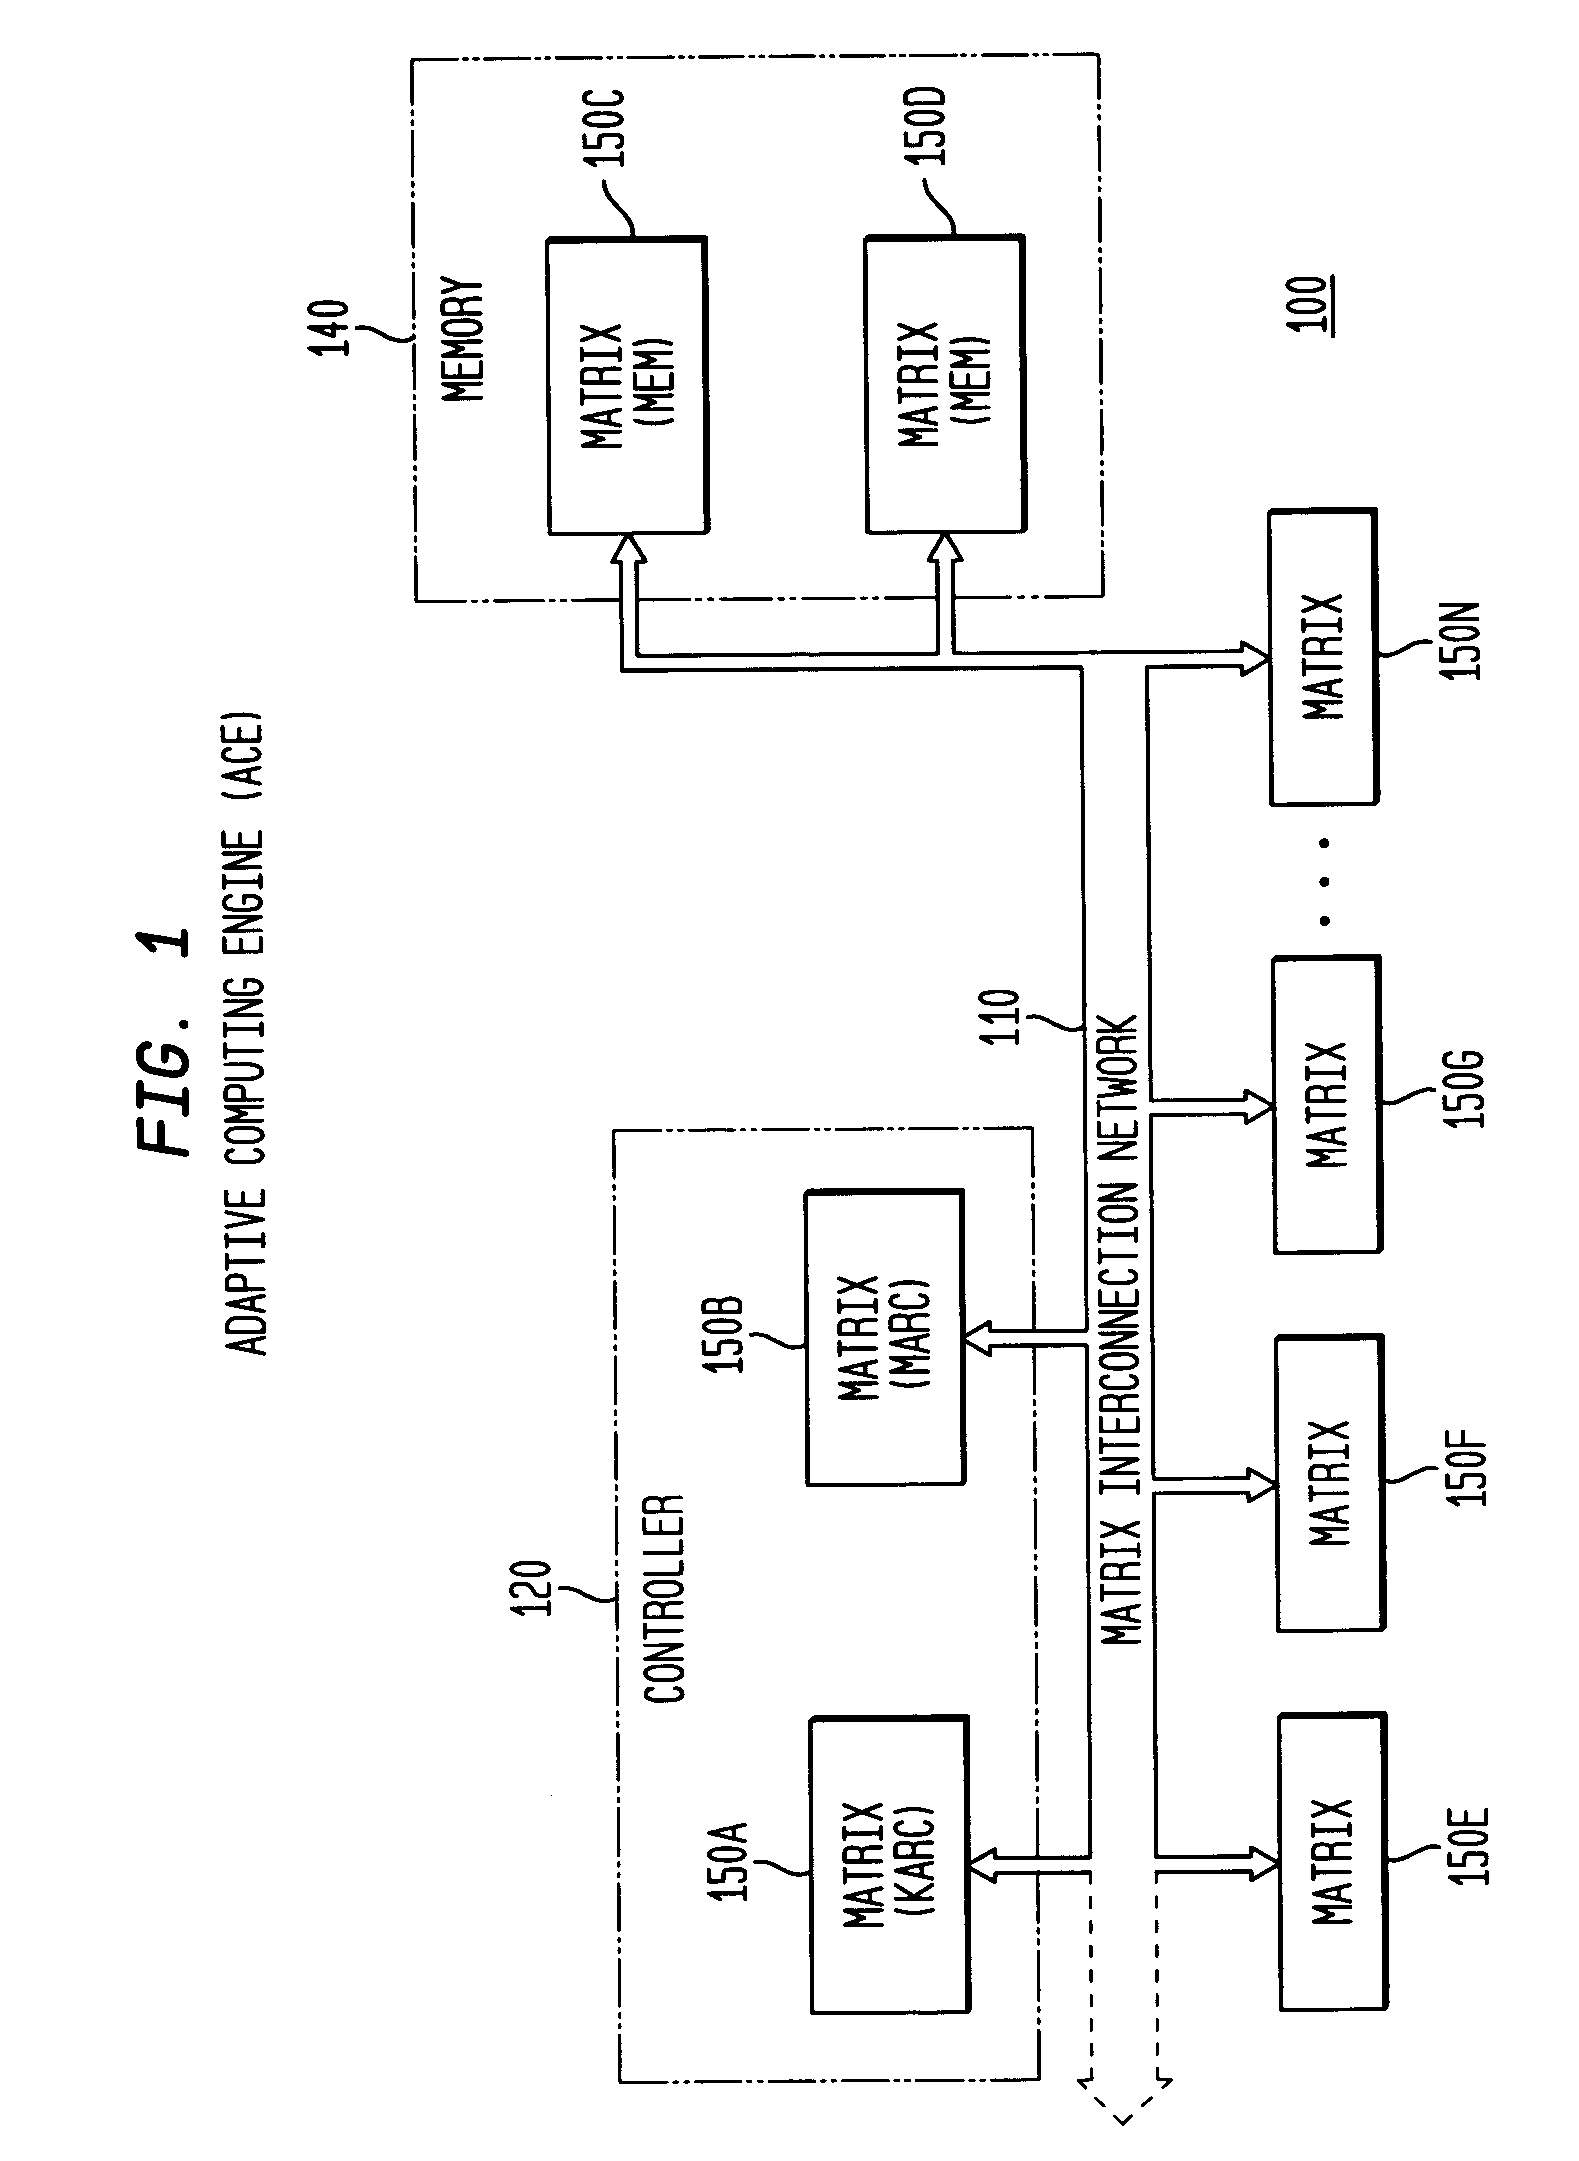 System, method and software for static and dynamic programming and configuration of an adaptive computing architecture